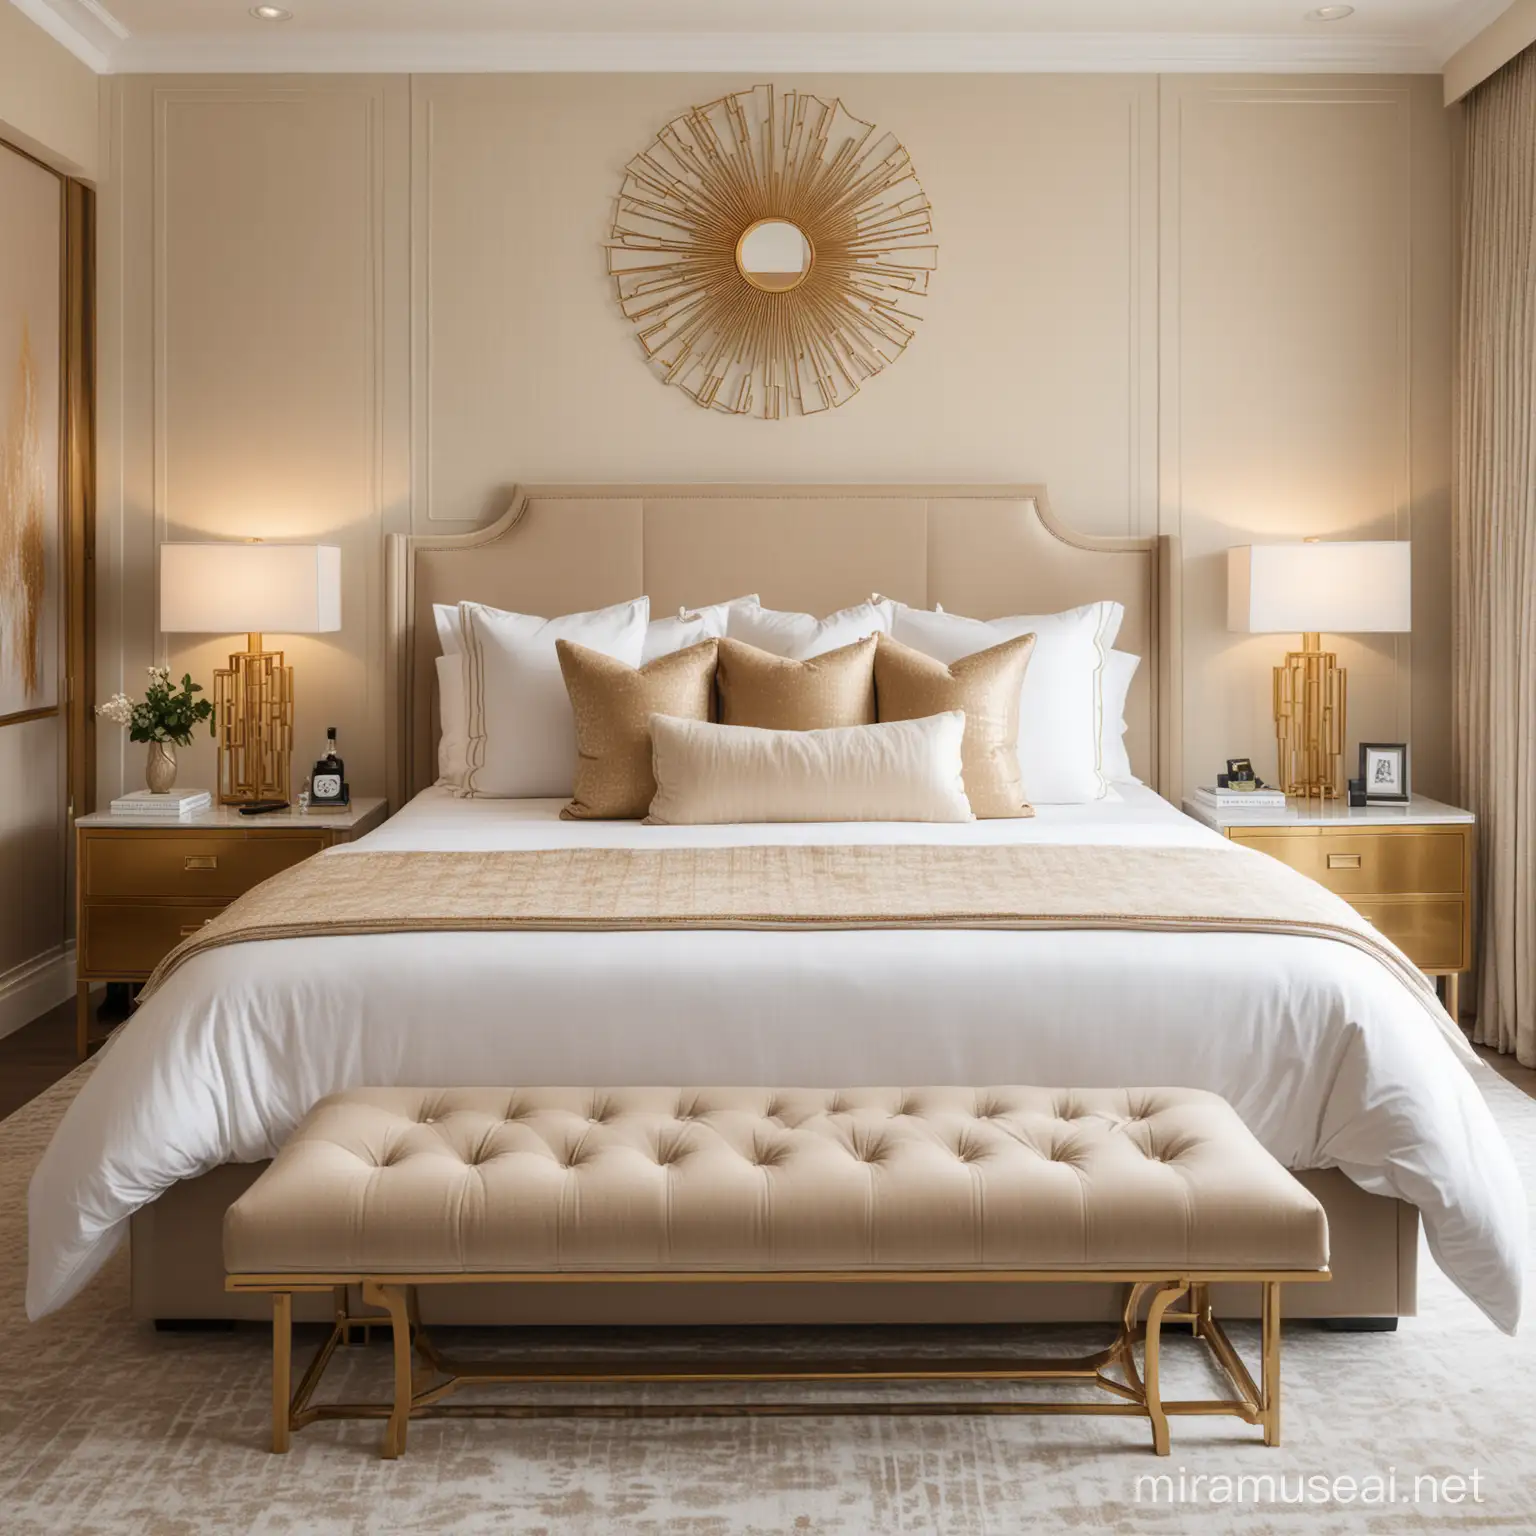 Luxurious California King Bedroom with Beige and Gold Accents Artsy Interior Design